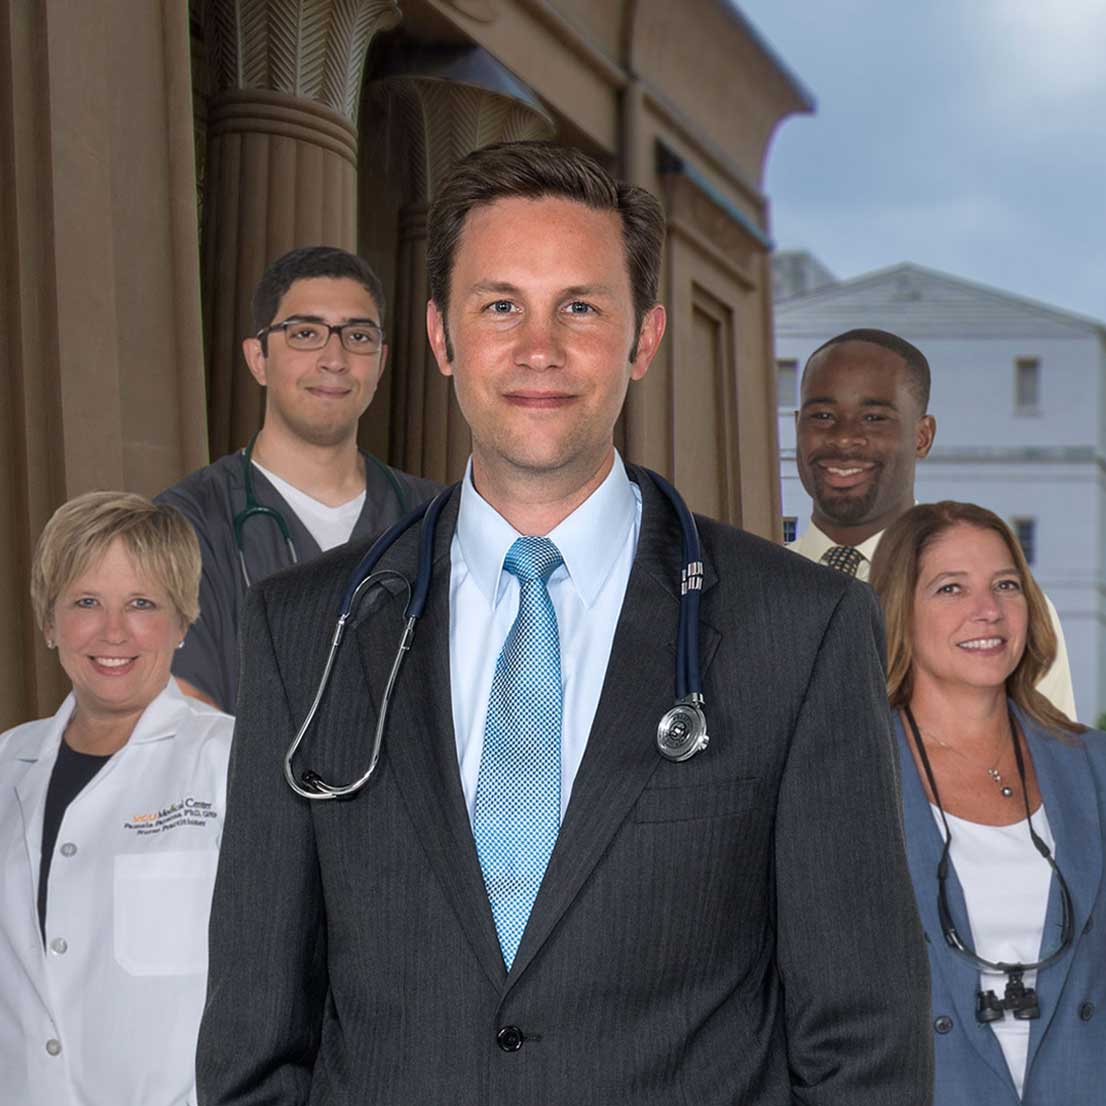 Alan Dow with four other individuals from different health professions posing in front of the Egyptian Building at VCU Medical Center